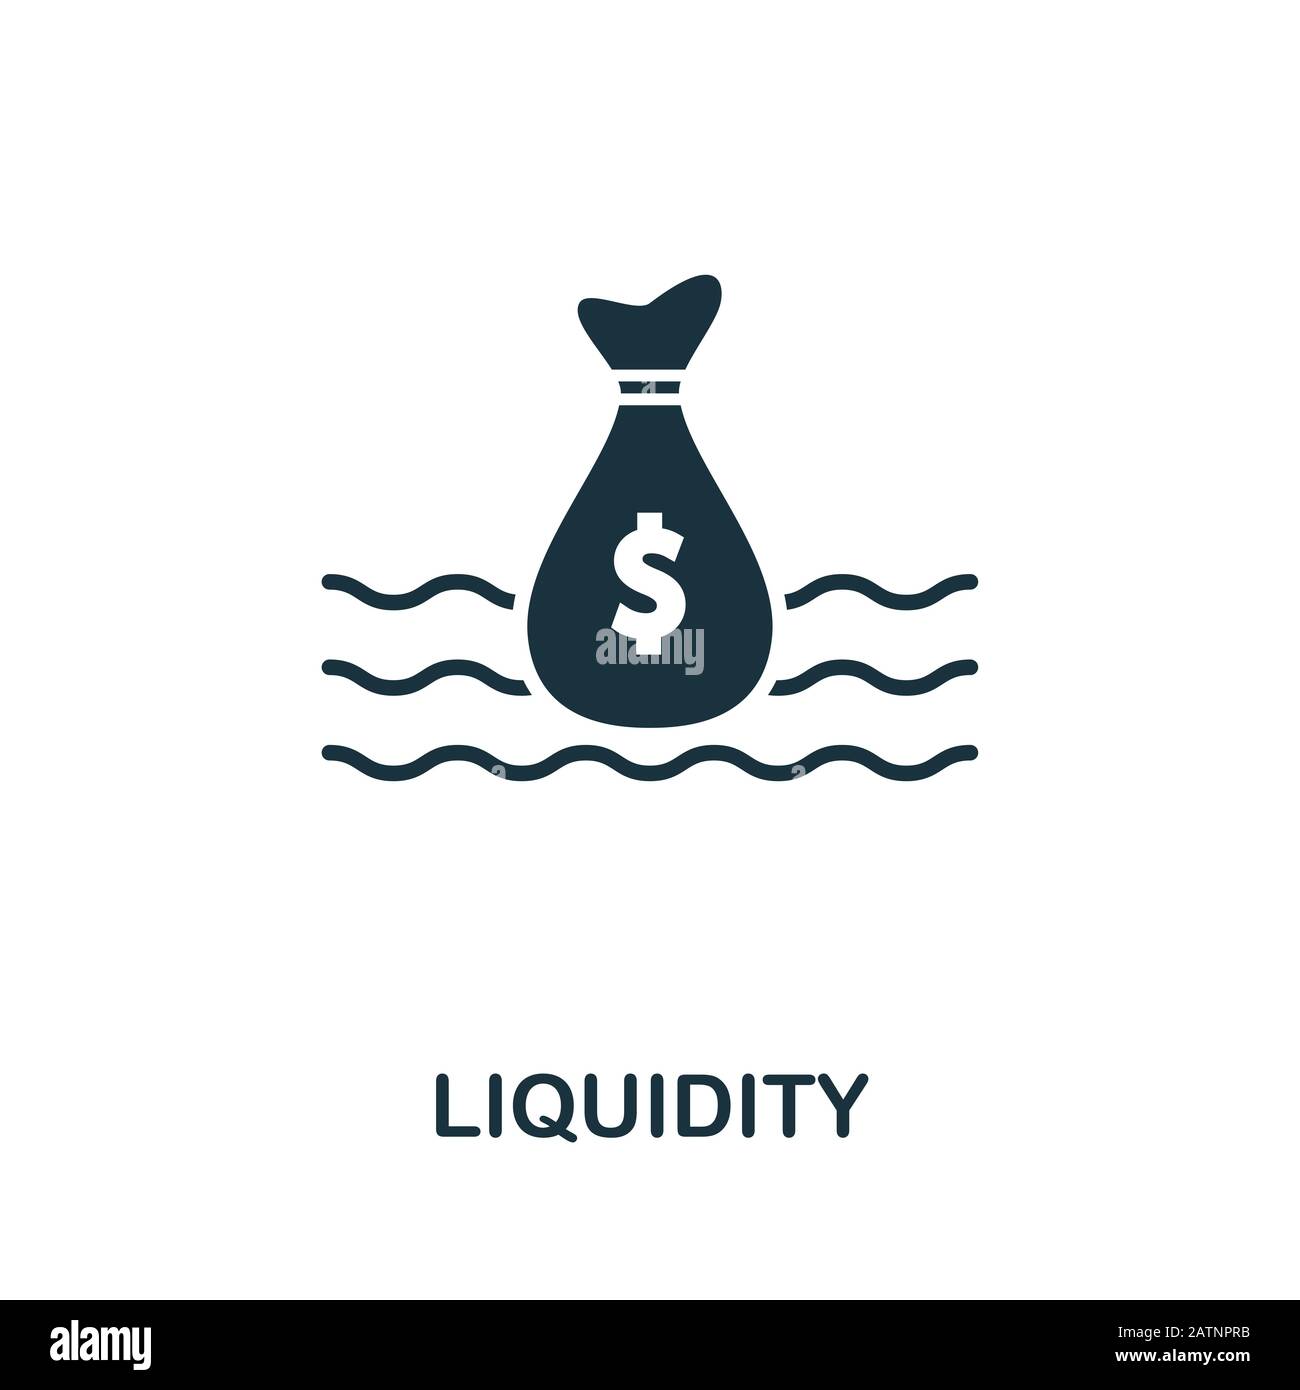 Liquidity icon. Creative element design from stock market icons collection. Pixel perfect Liquidity icon for web design, apps, software, print usage Stock Photo